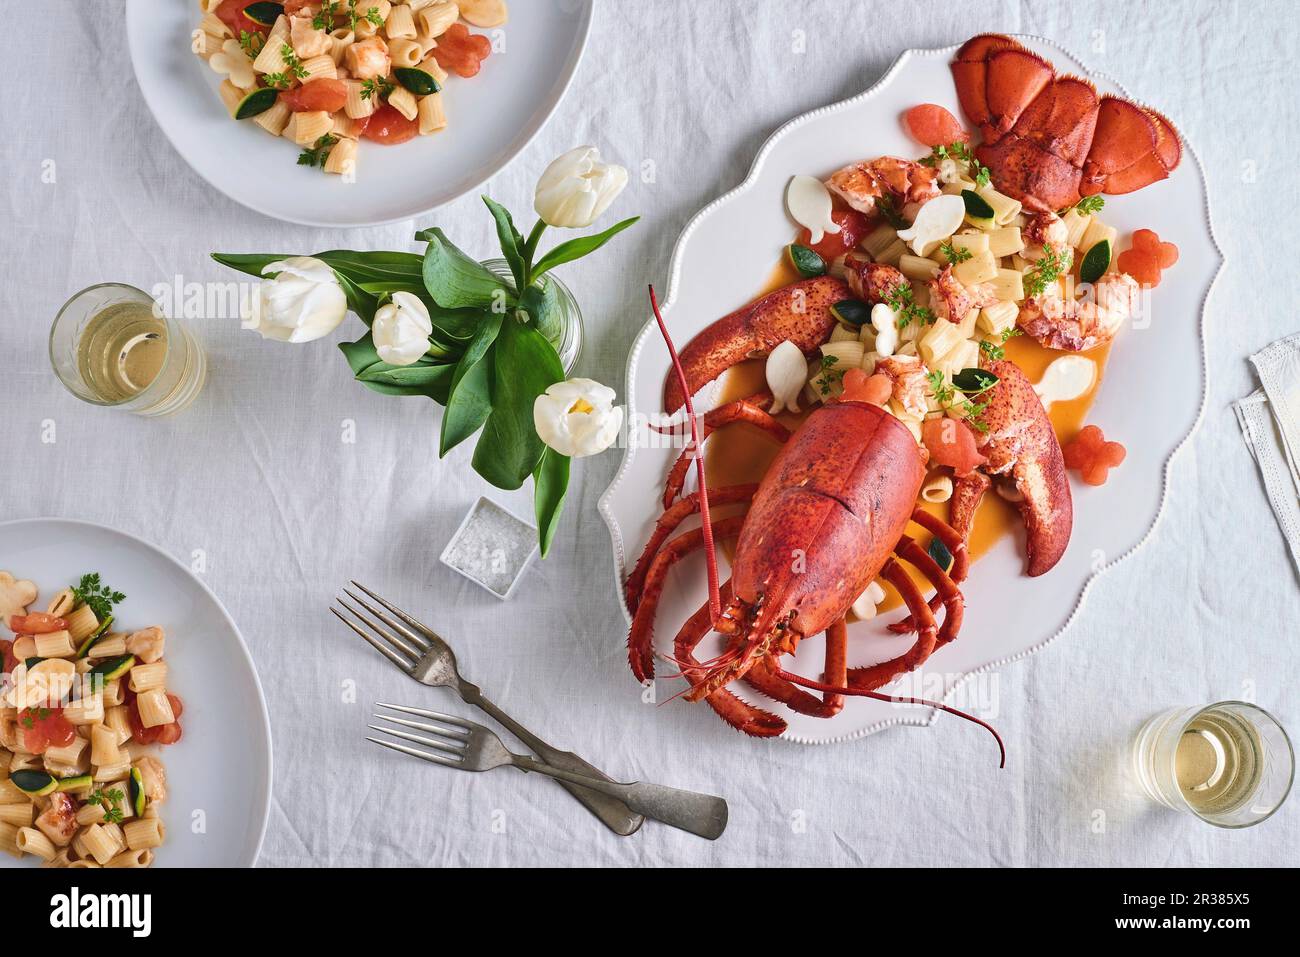 Lobster with rigatoni on a table decorated with a vase of tulips (seen from above) Stock Photo